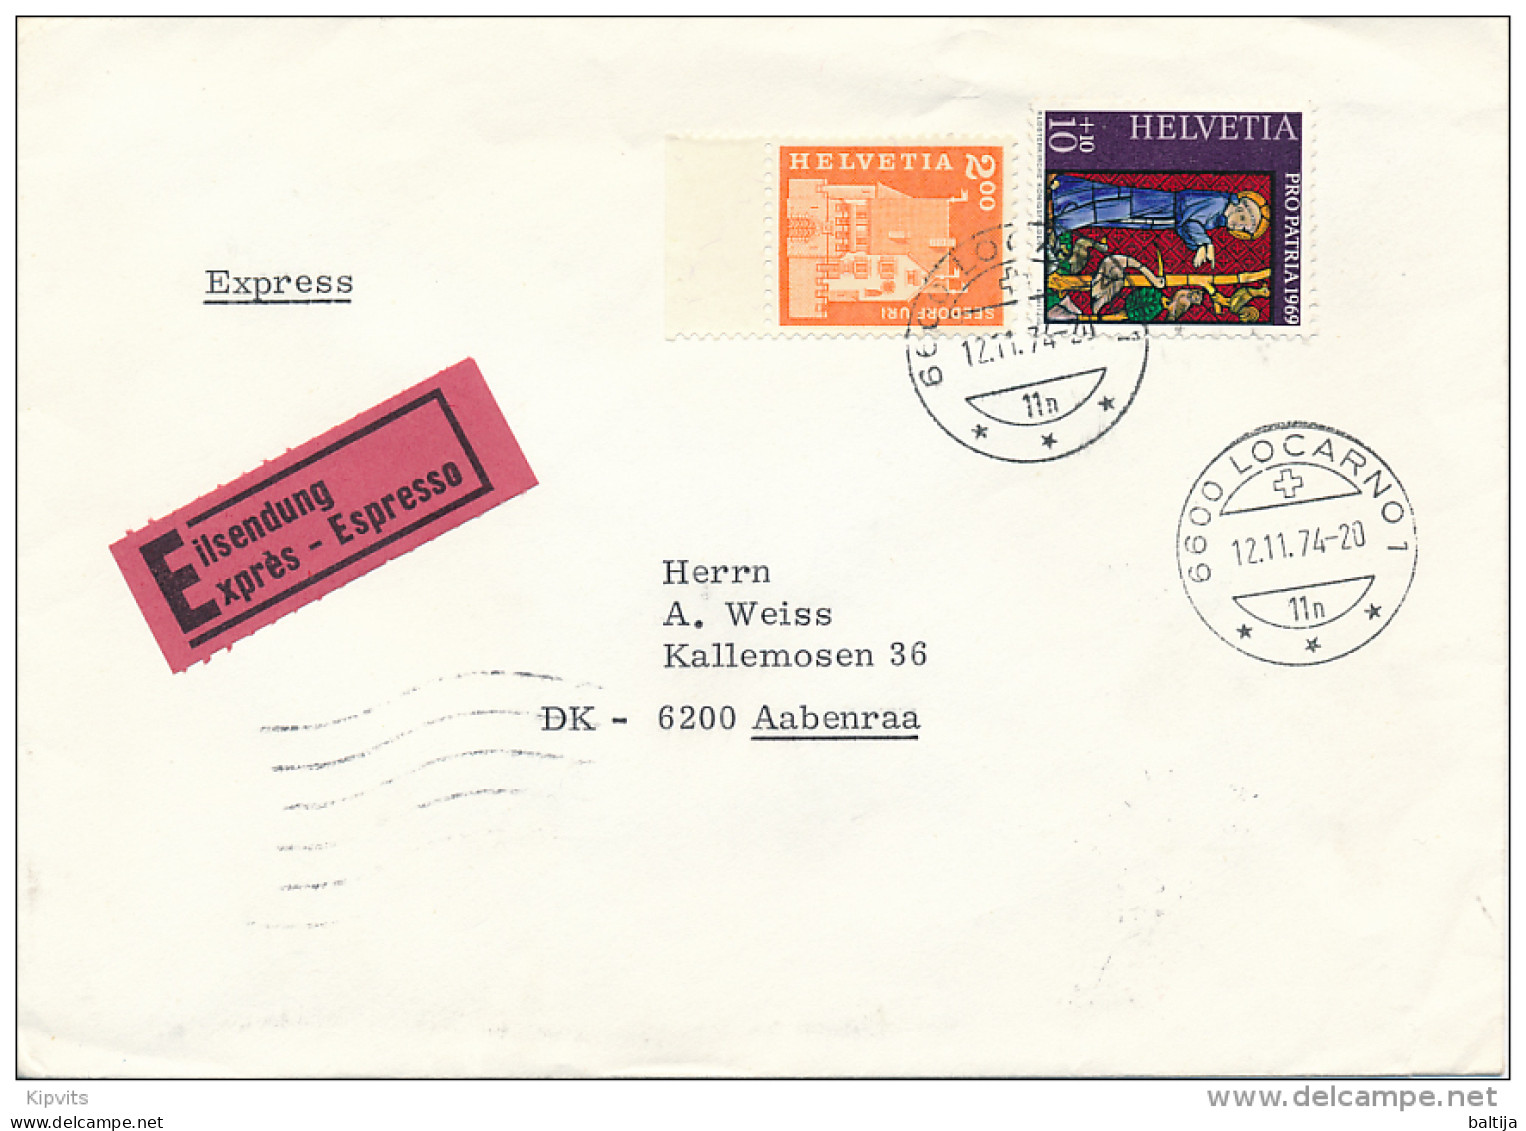 Express Eilsendung, Special Delivery Cover Abroad - 12 November 1974 Locarno 1 - Storia Postale